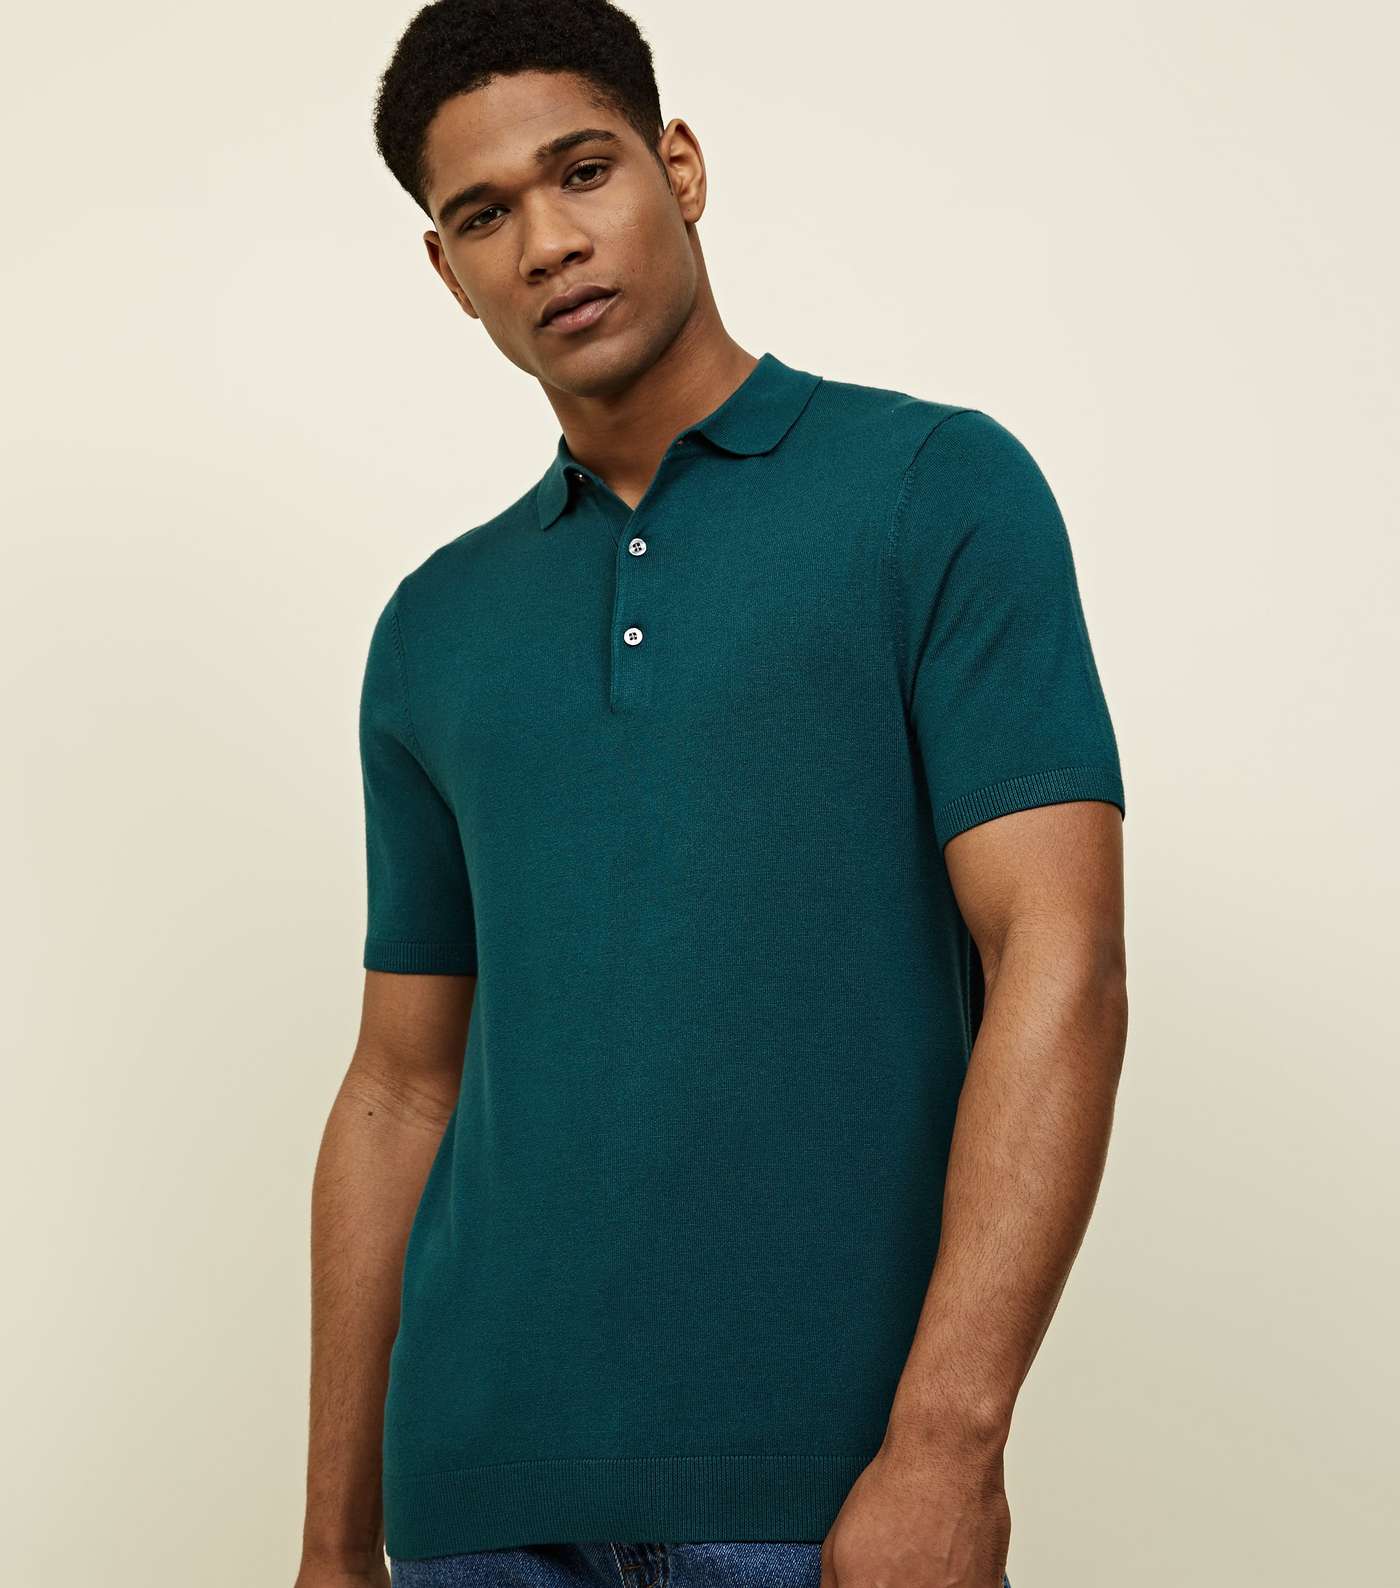 Teal Knit Muscle Fit Polo Shirt